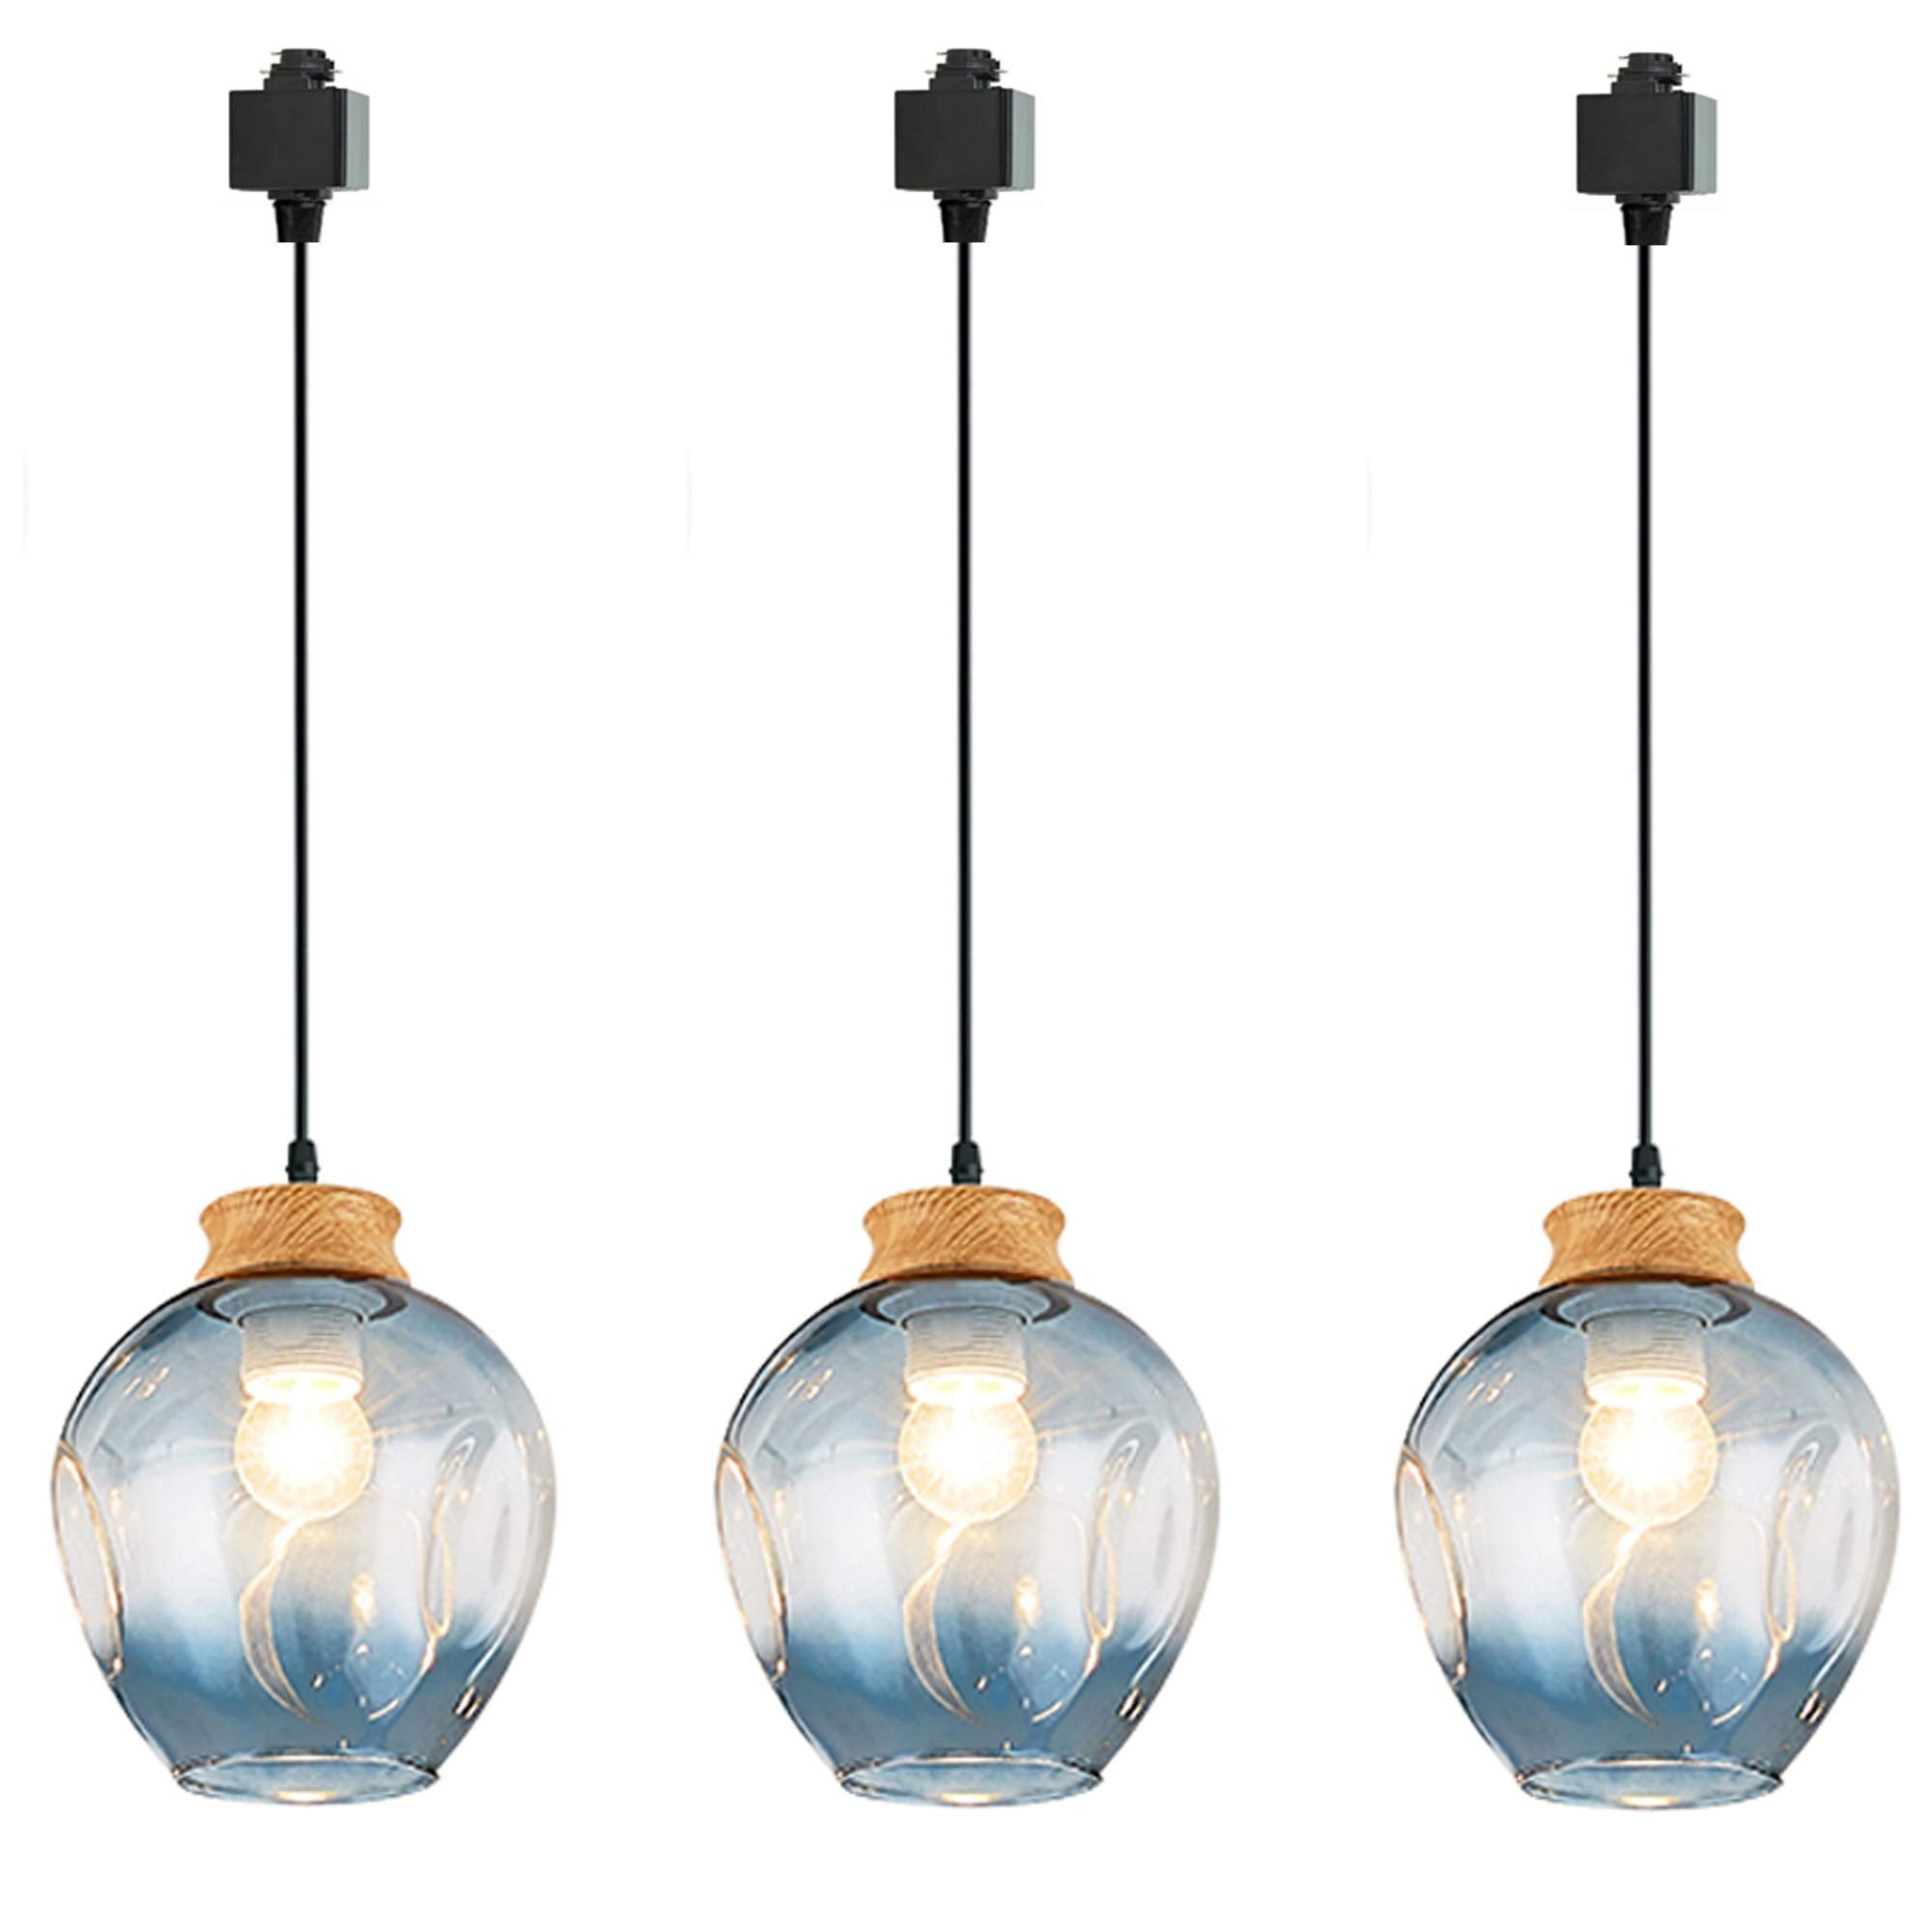 krystal punkt sokker FSLiving 3-Lights Ceiling Lamp Set for H-Type Track Nordic Blue Glass  Lampshade Loft Style with 1.6ft Cord Light Fixtures Minimalist Retro Pendant  Light Bulbs Not Included - Walmart.com